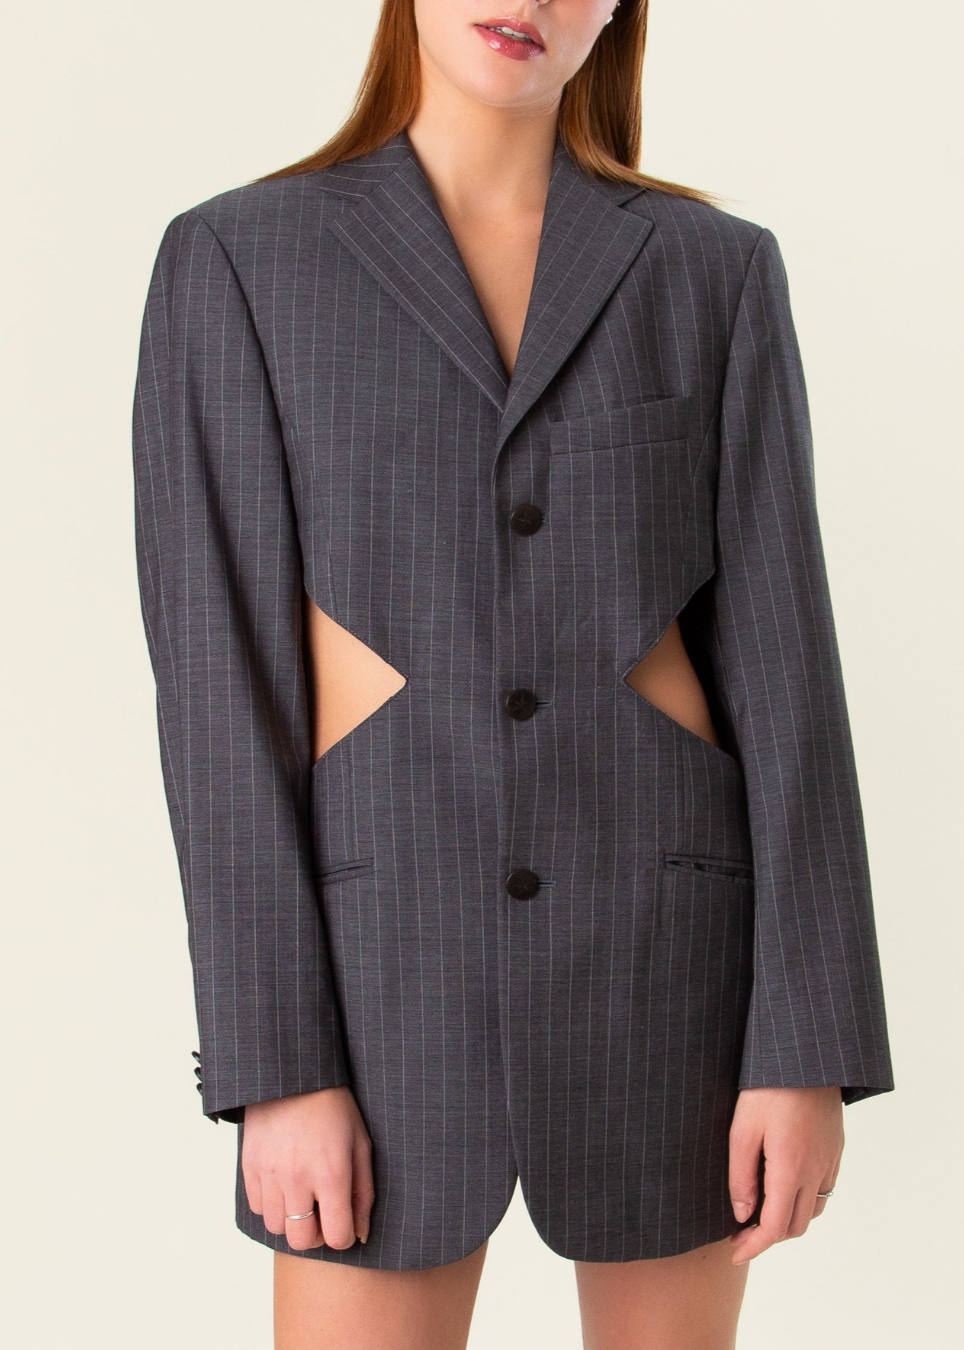 The Cut Out Blazer